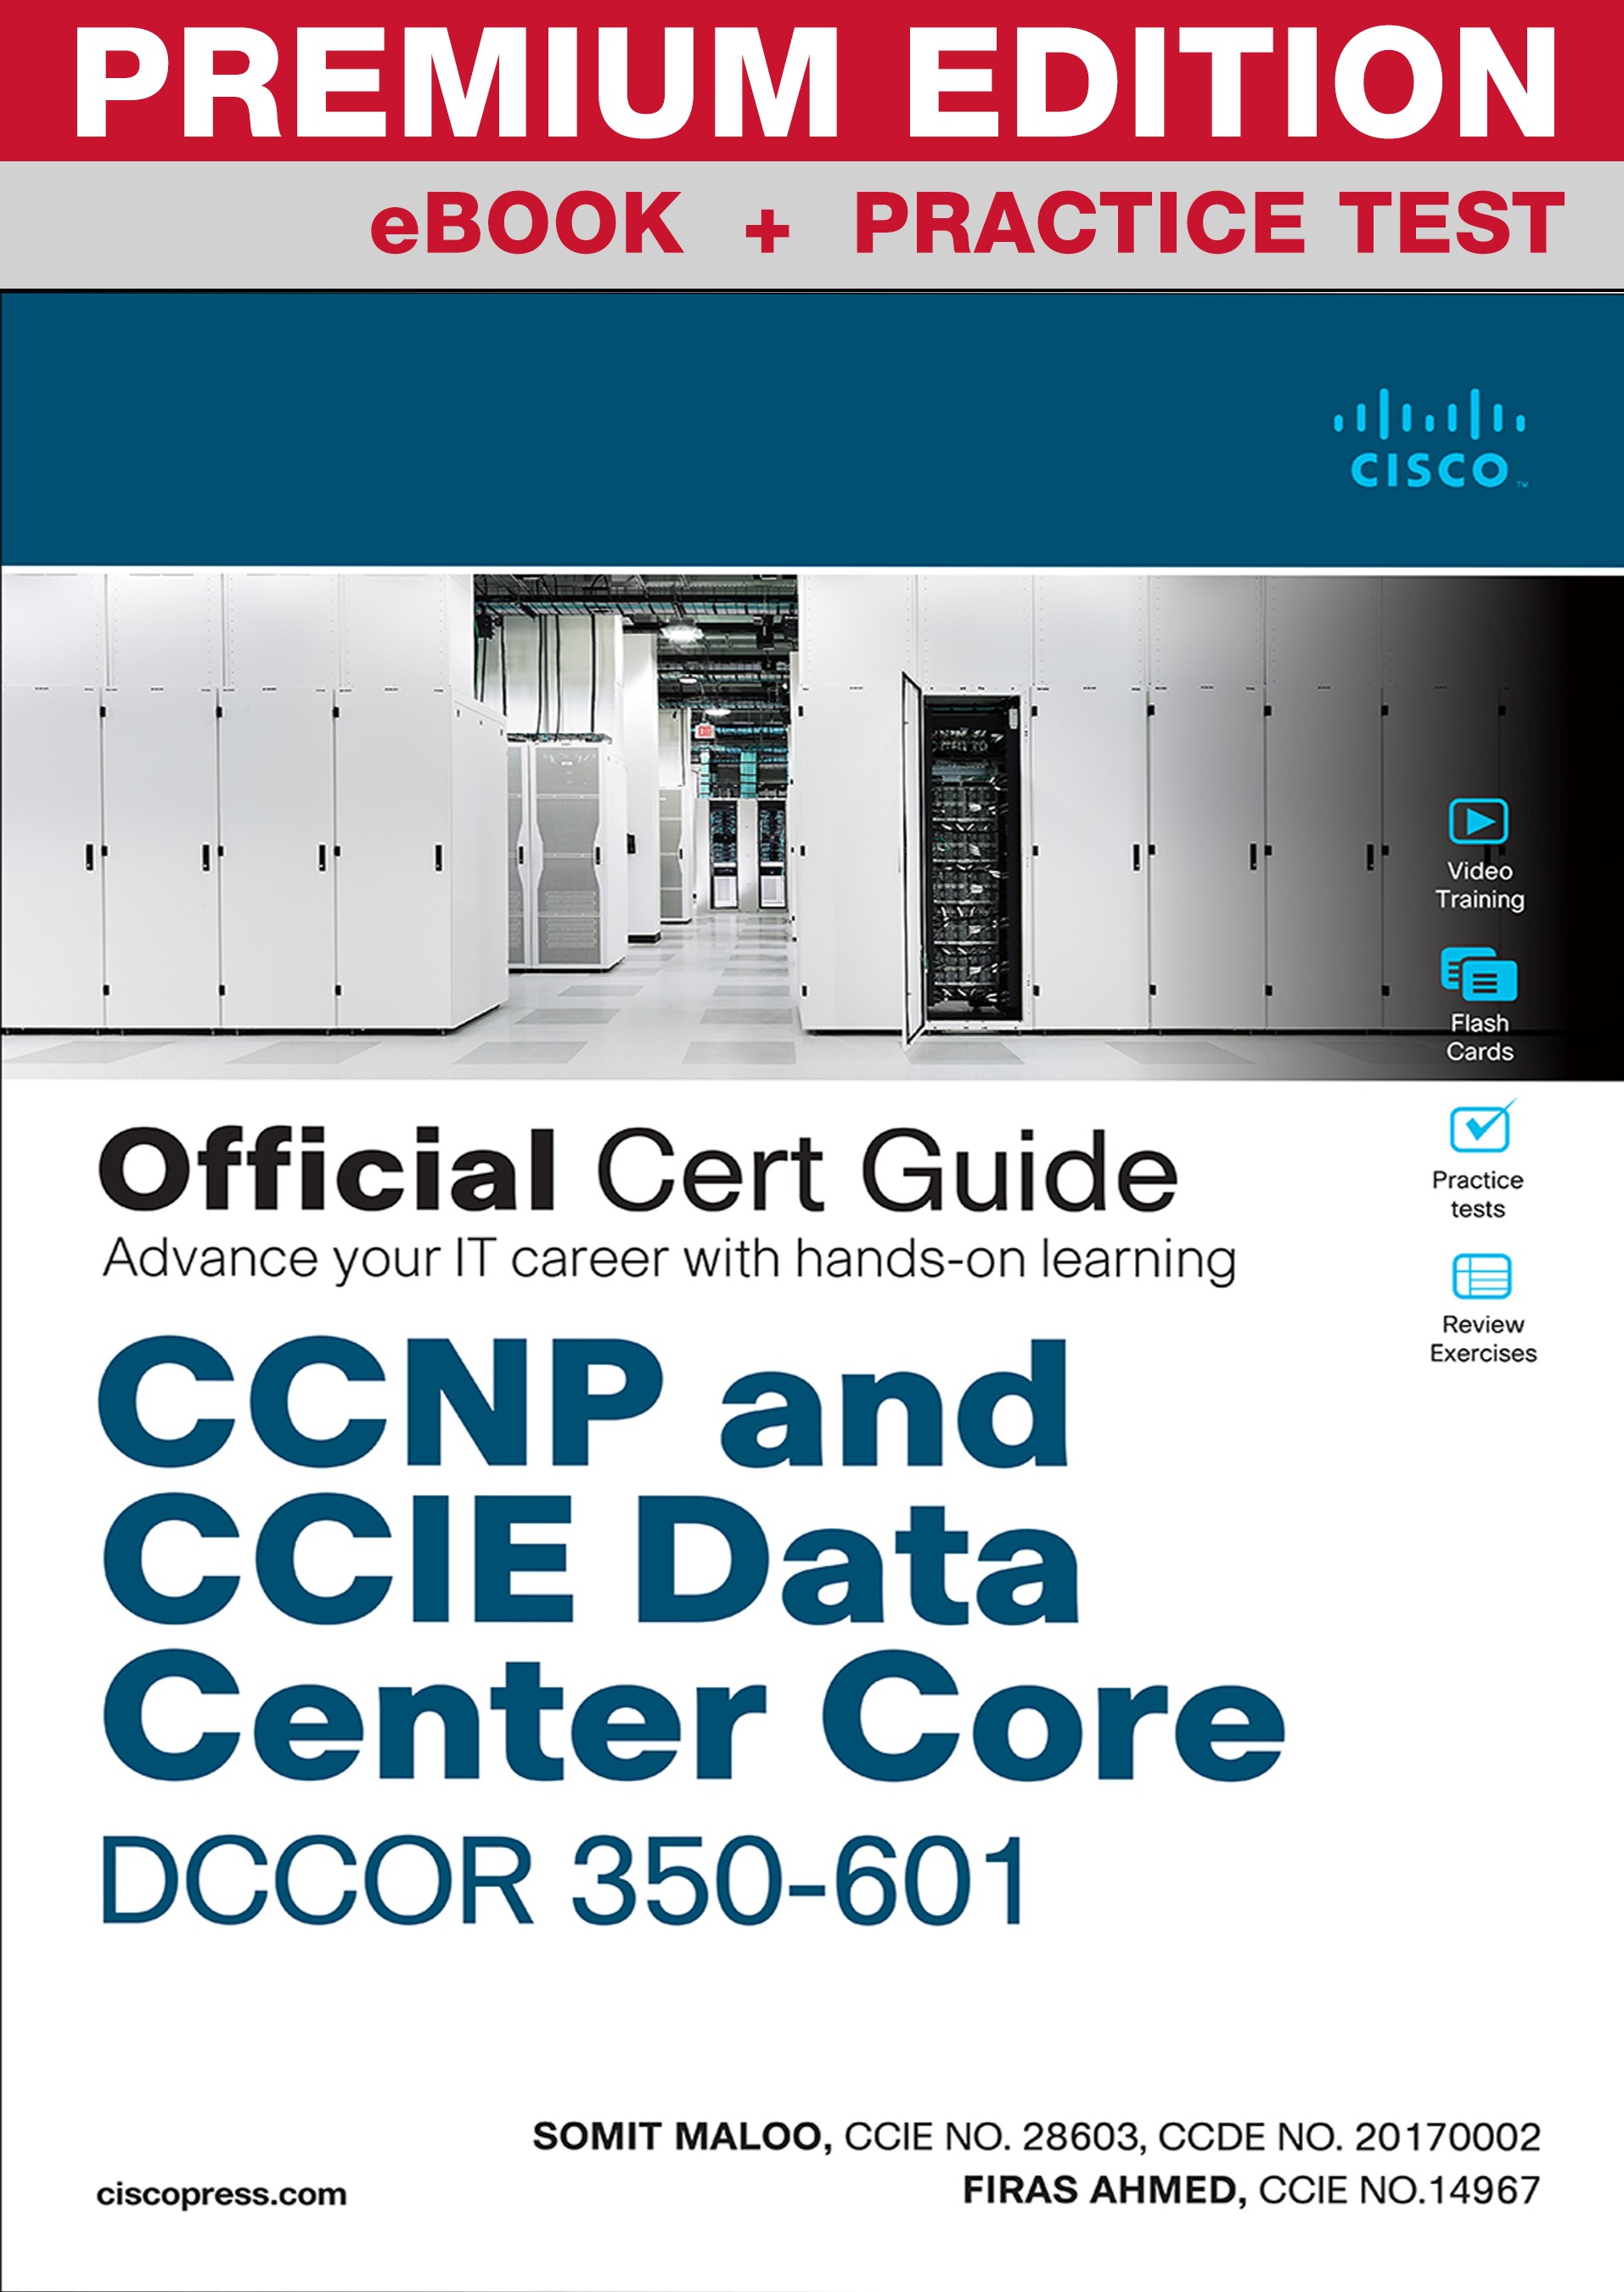 CCNP and CCIE Data Center Core DCCOR 350-601 Official Cert Guide Premium Edition and Practice Test